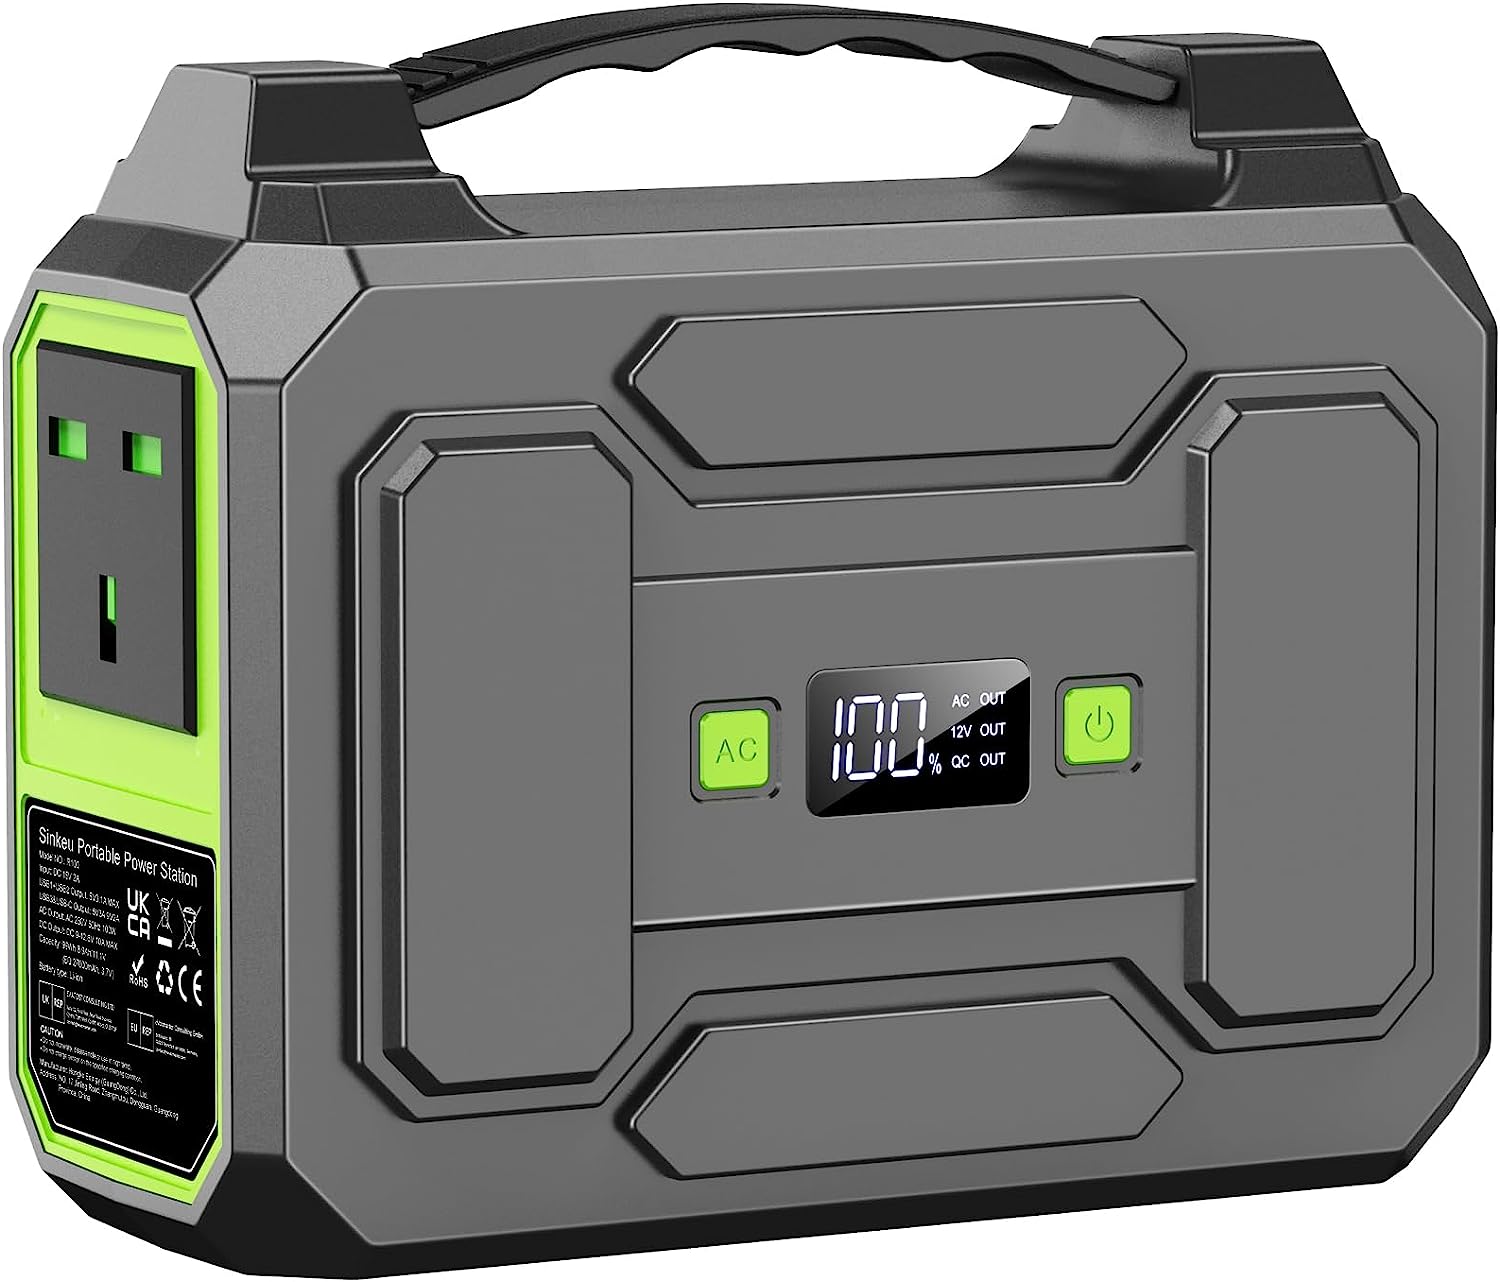 Image of SinKeu Portable Power Station 100W 27000mAh/99Wh Review